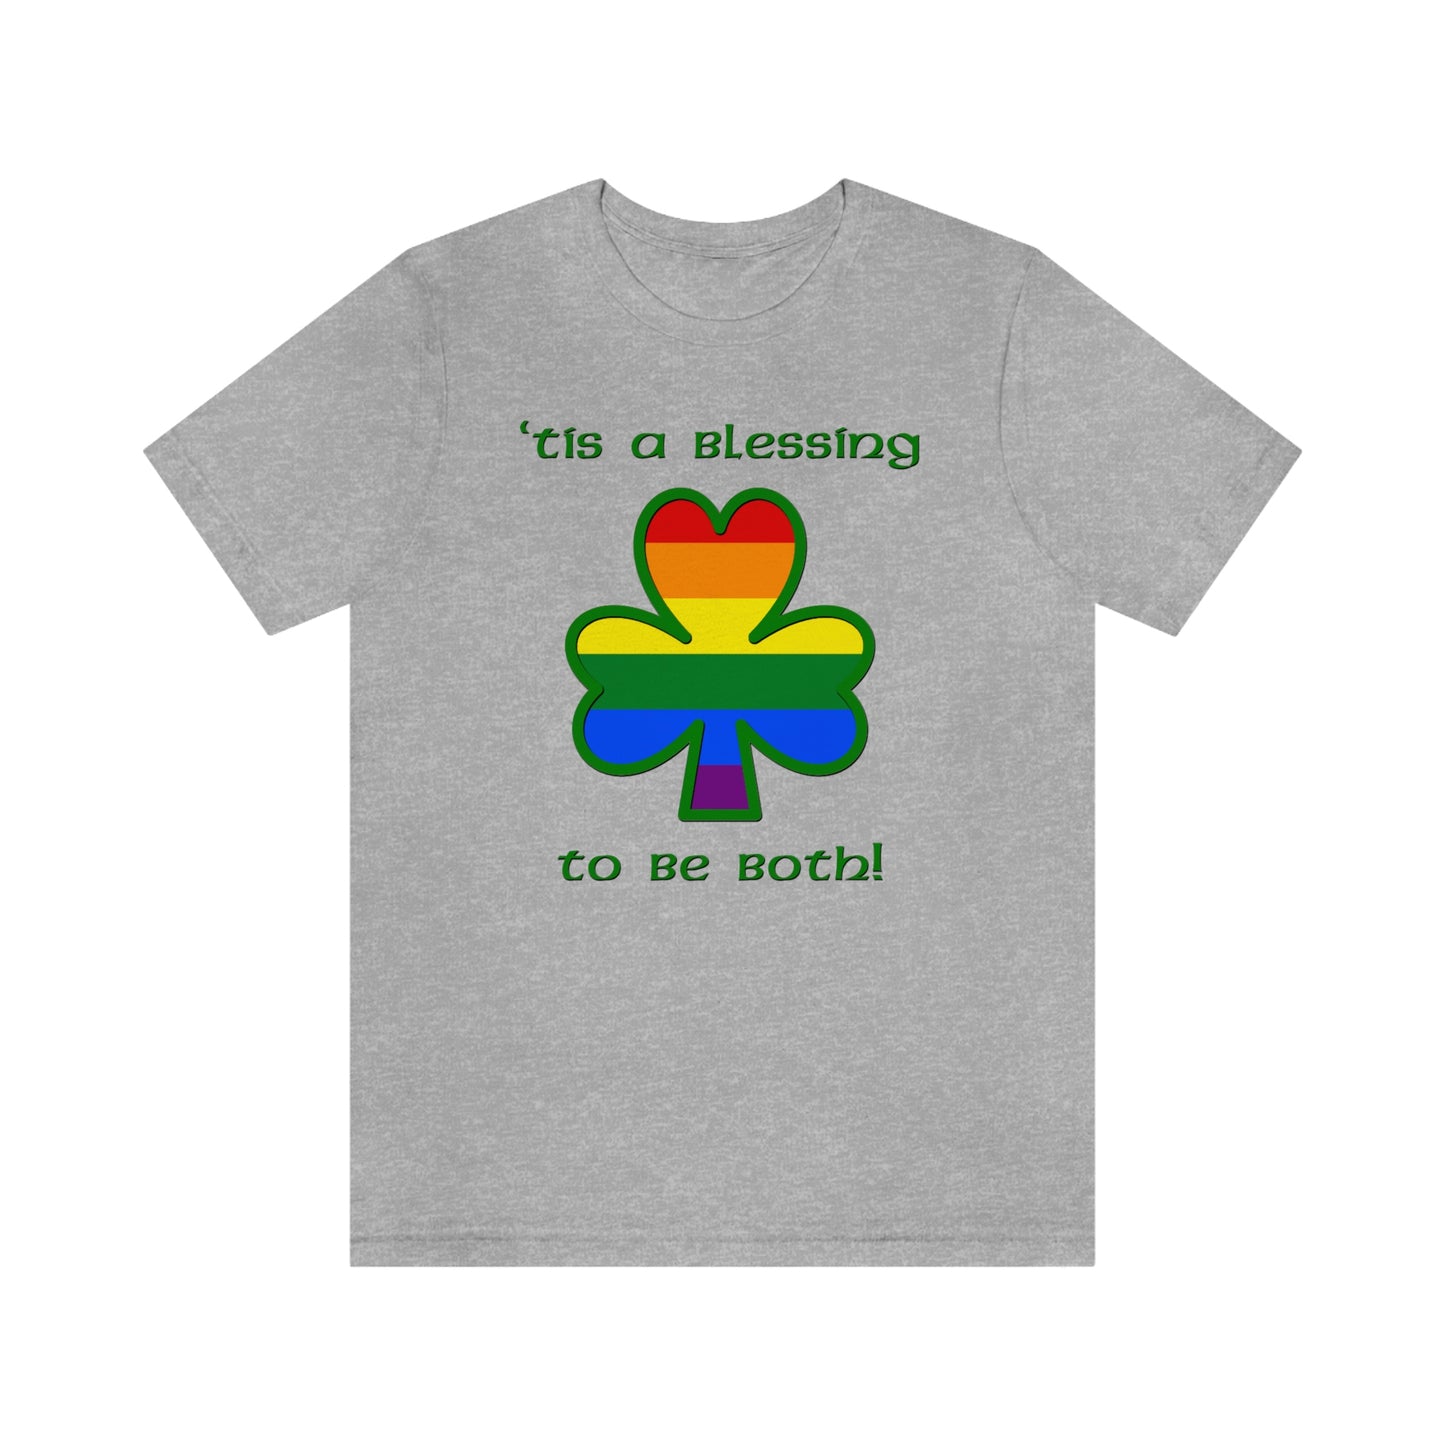 'Tis a Blessing to Be Both Adult Unisex T-Shirt